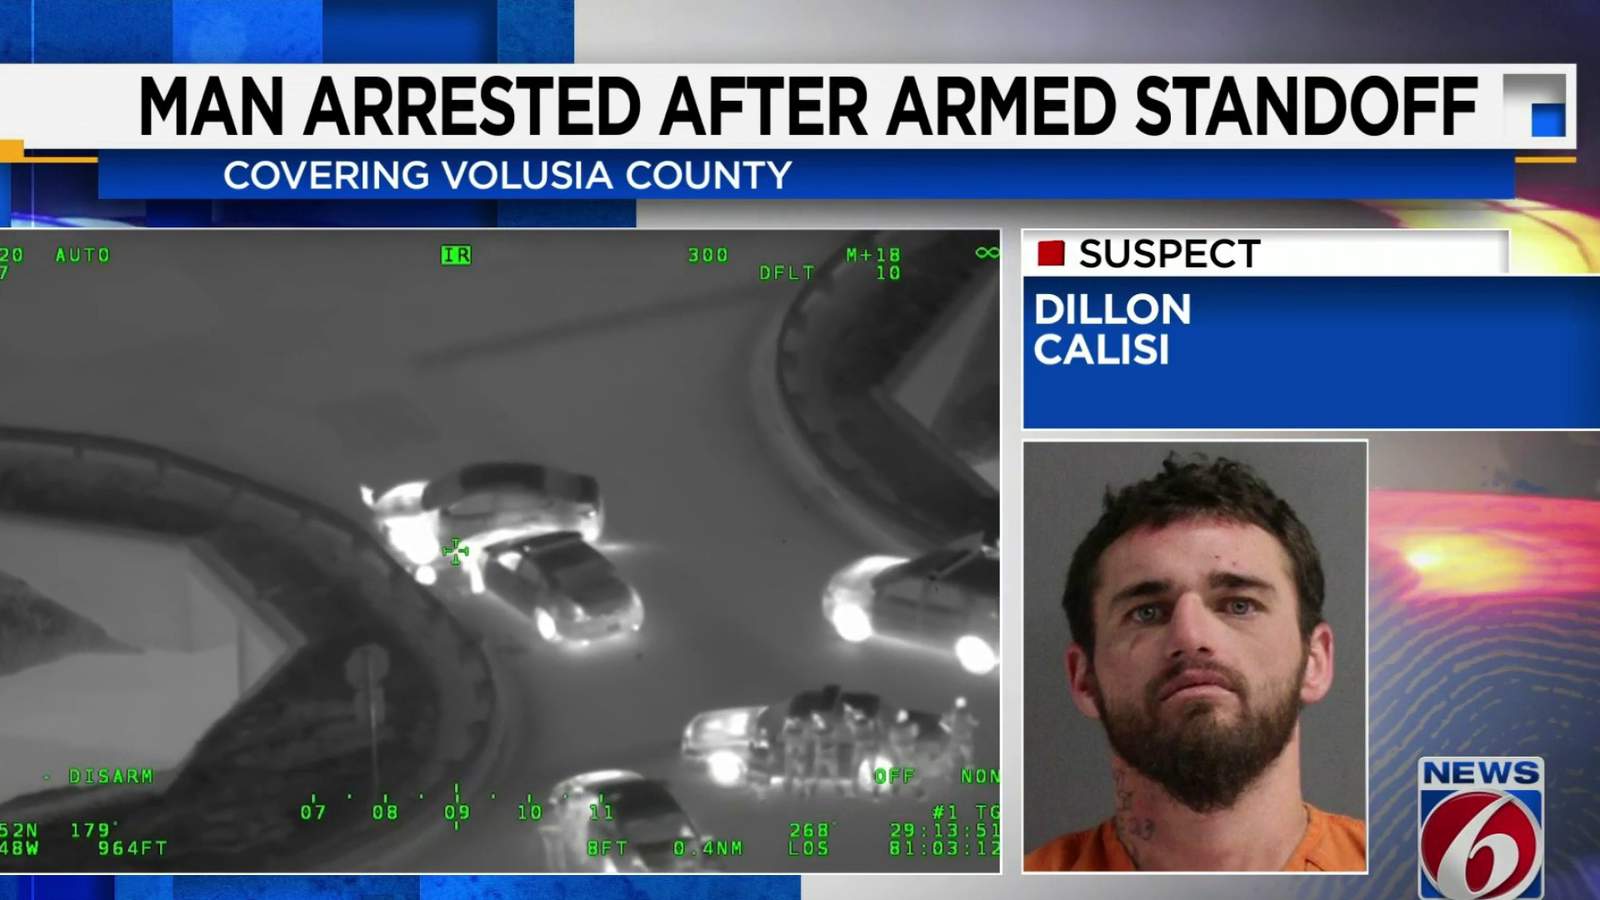 Man arrested after attack on officer and armed standoff in Volusia County